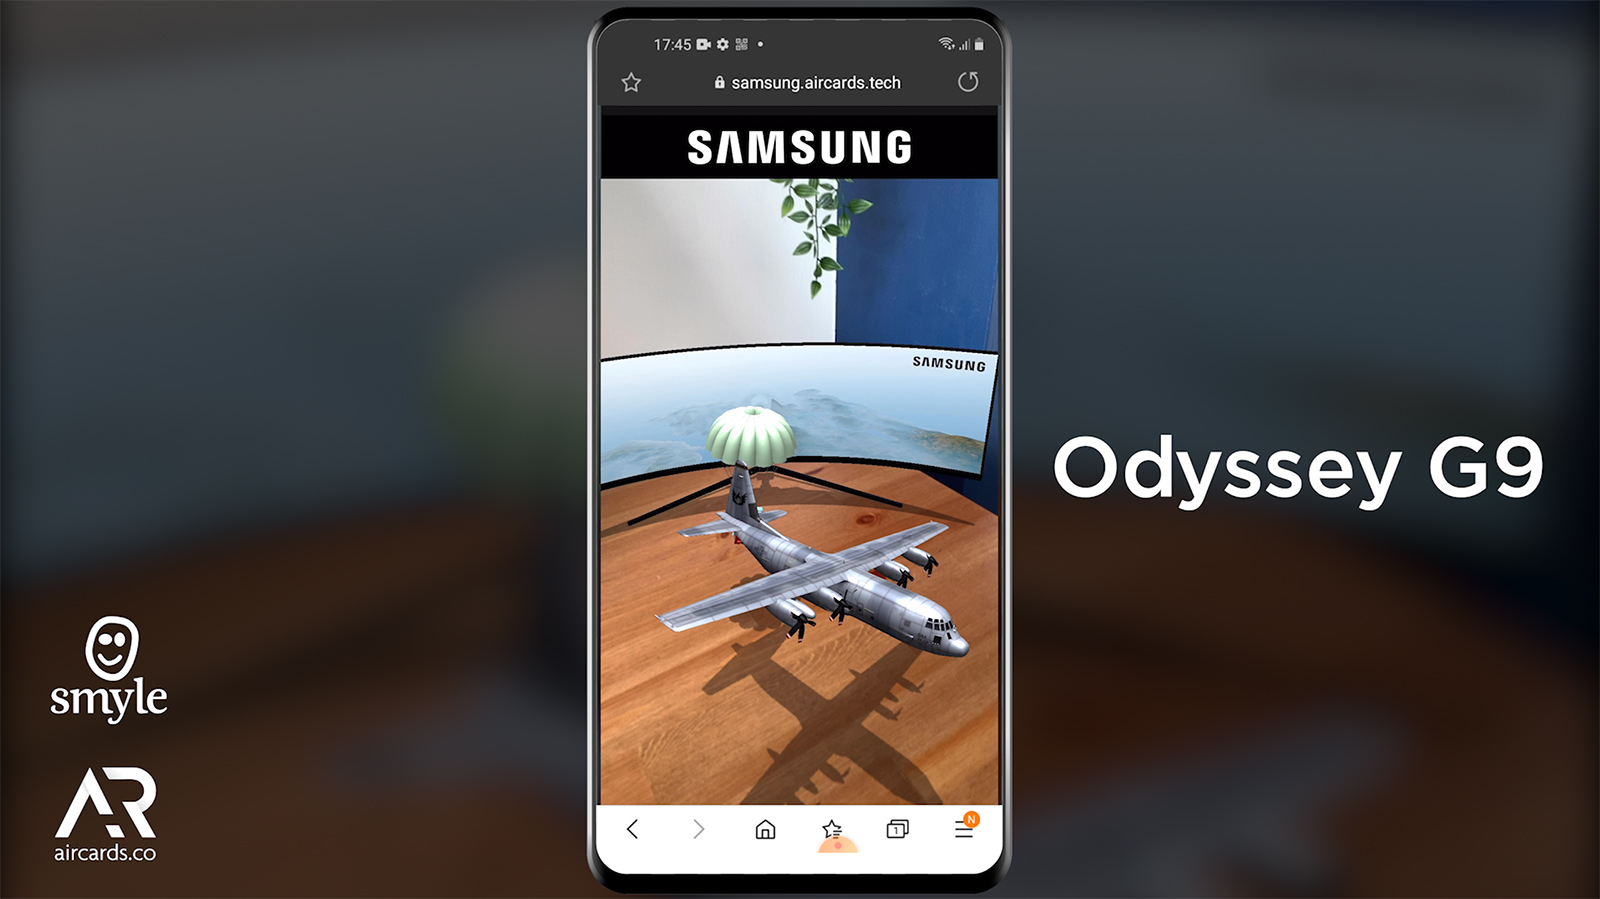 The Web AR demonstration for the Odyssey monitor also featured a custom 3D animation with visuals derived from PUBG, emerging seamlessly from the screen.